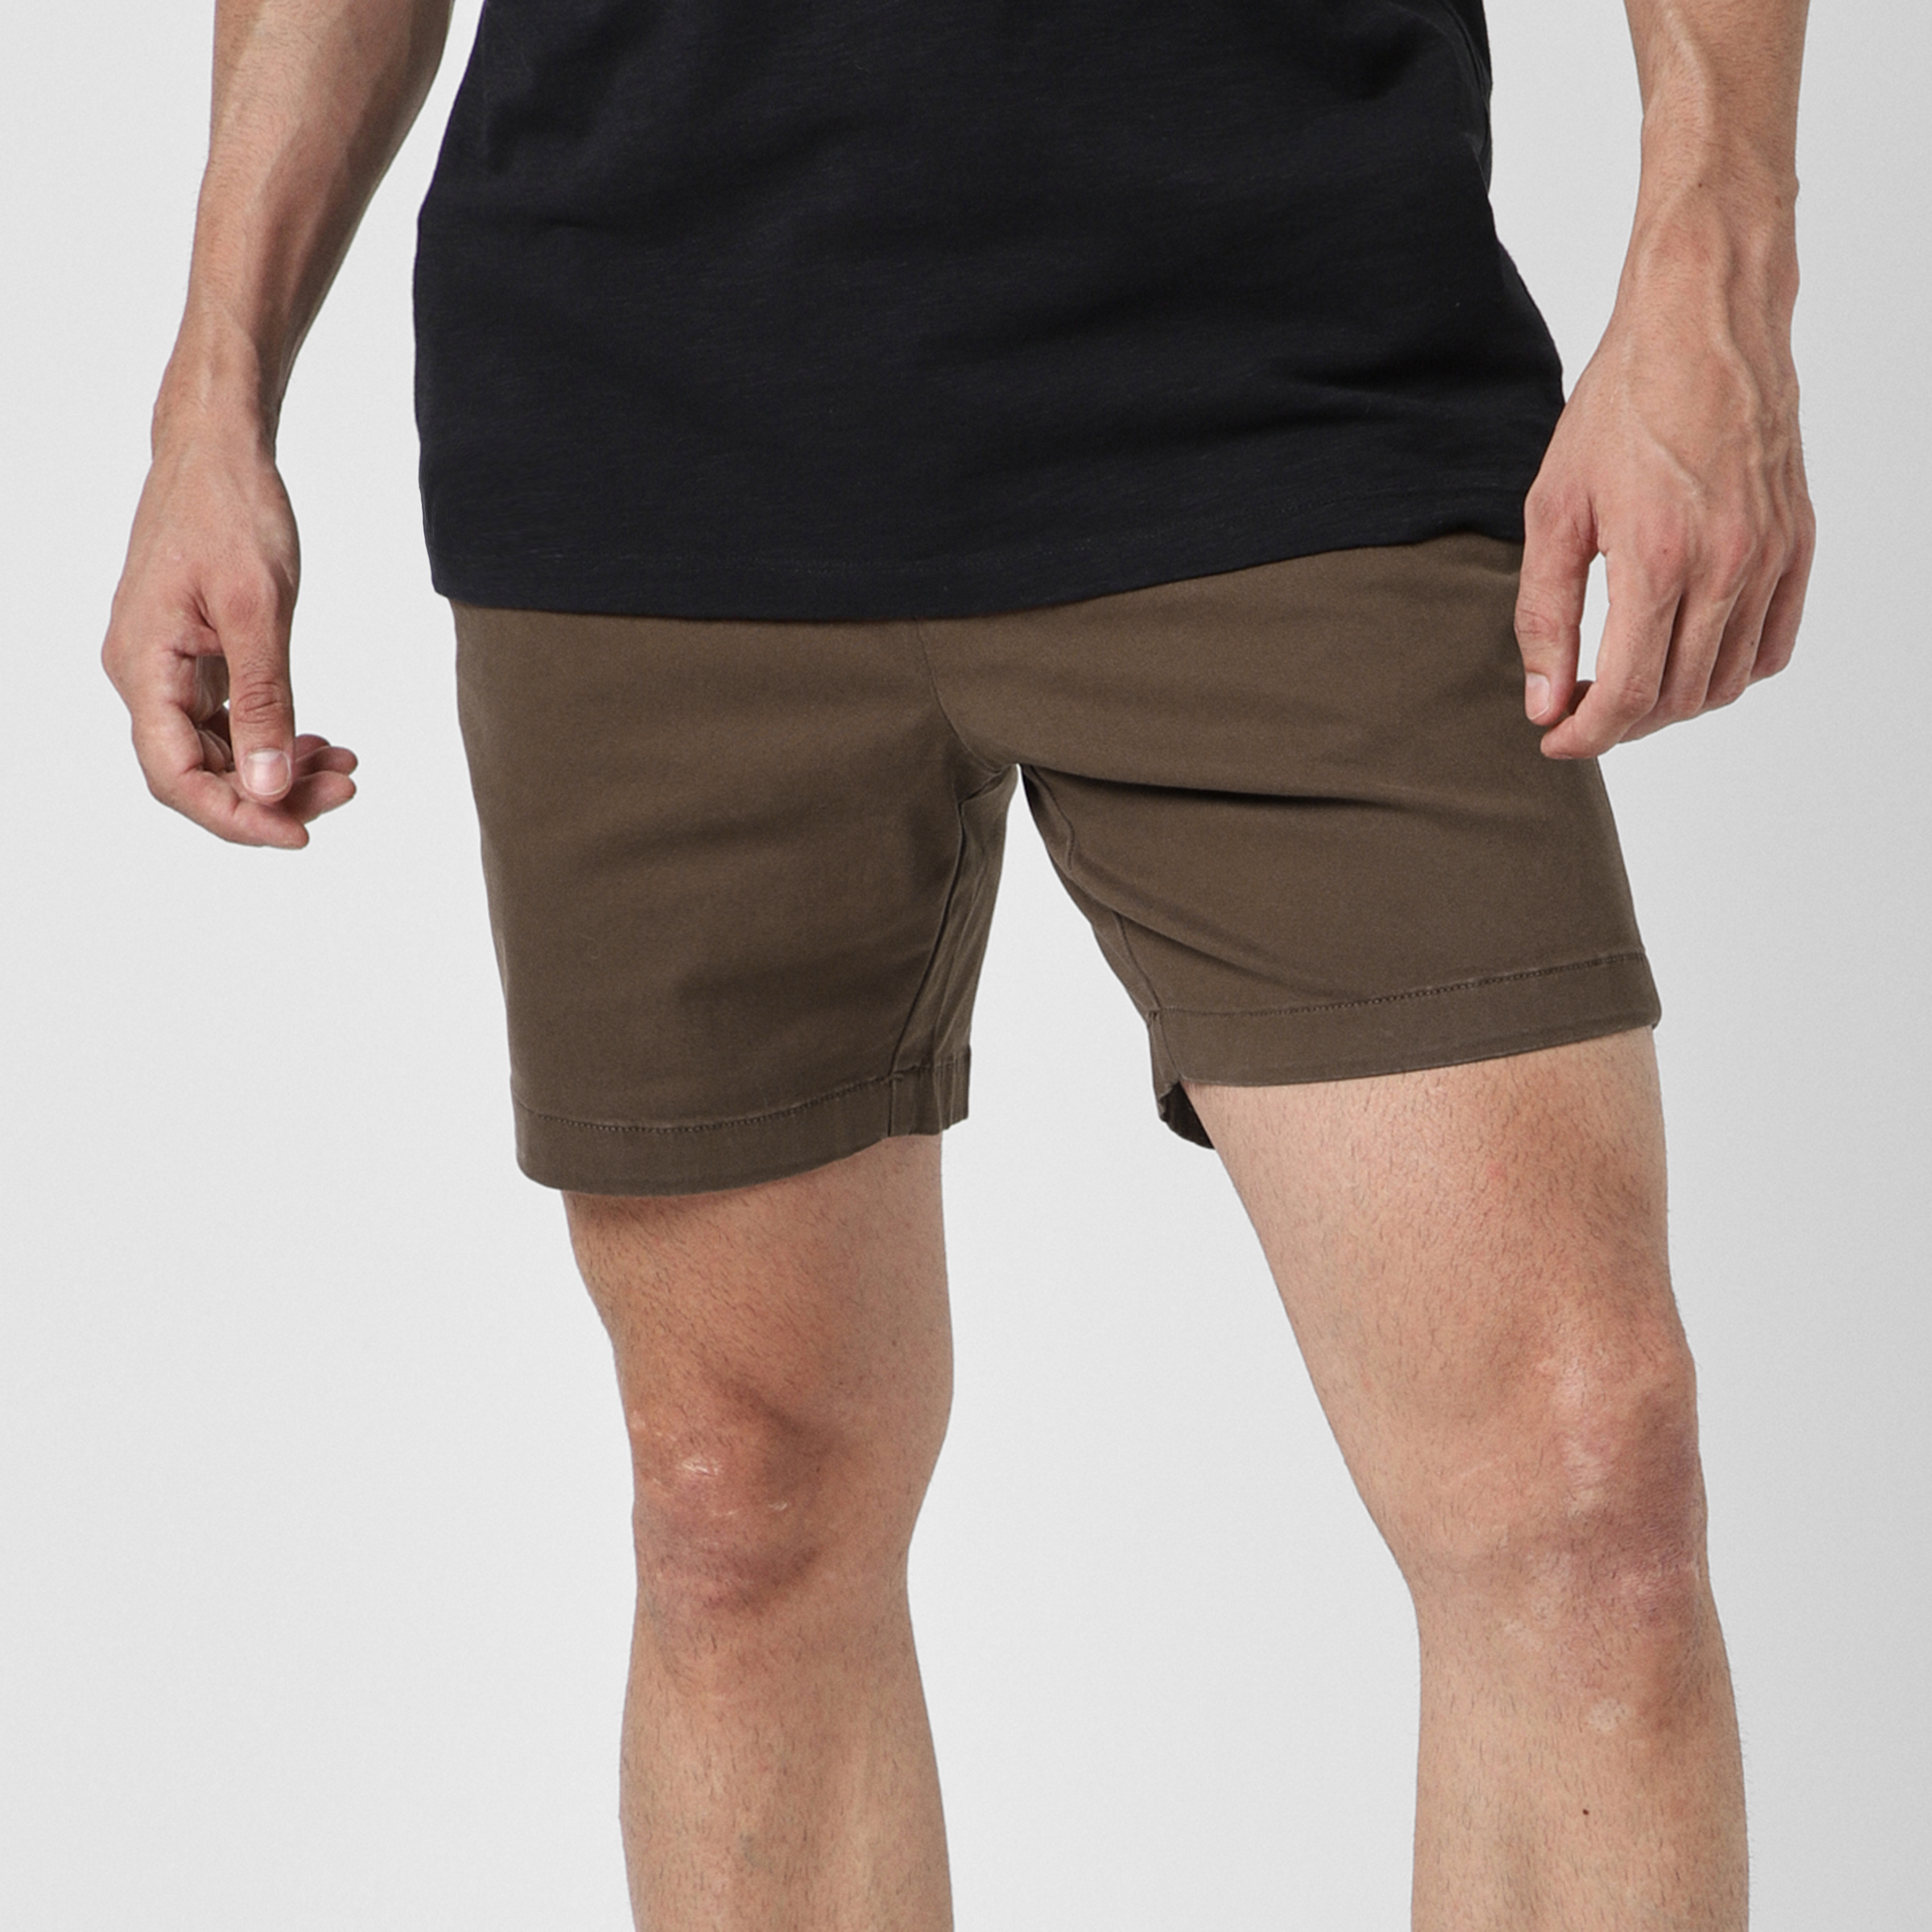 Stretch Chino Short 7" in Cocoa front on model